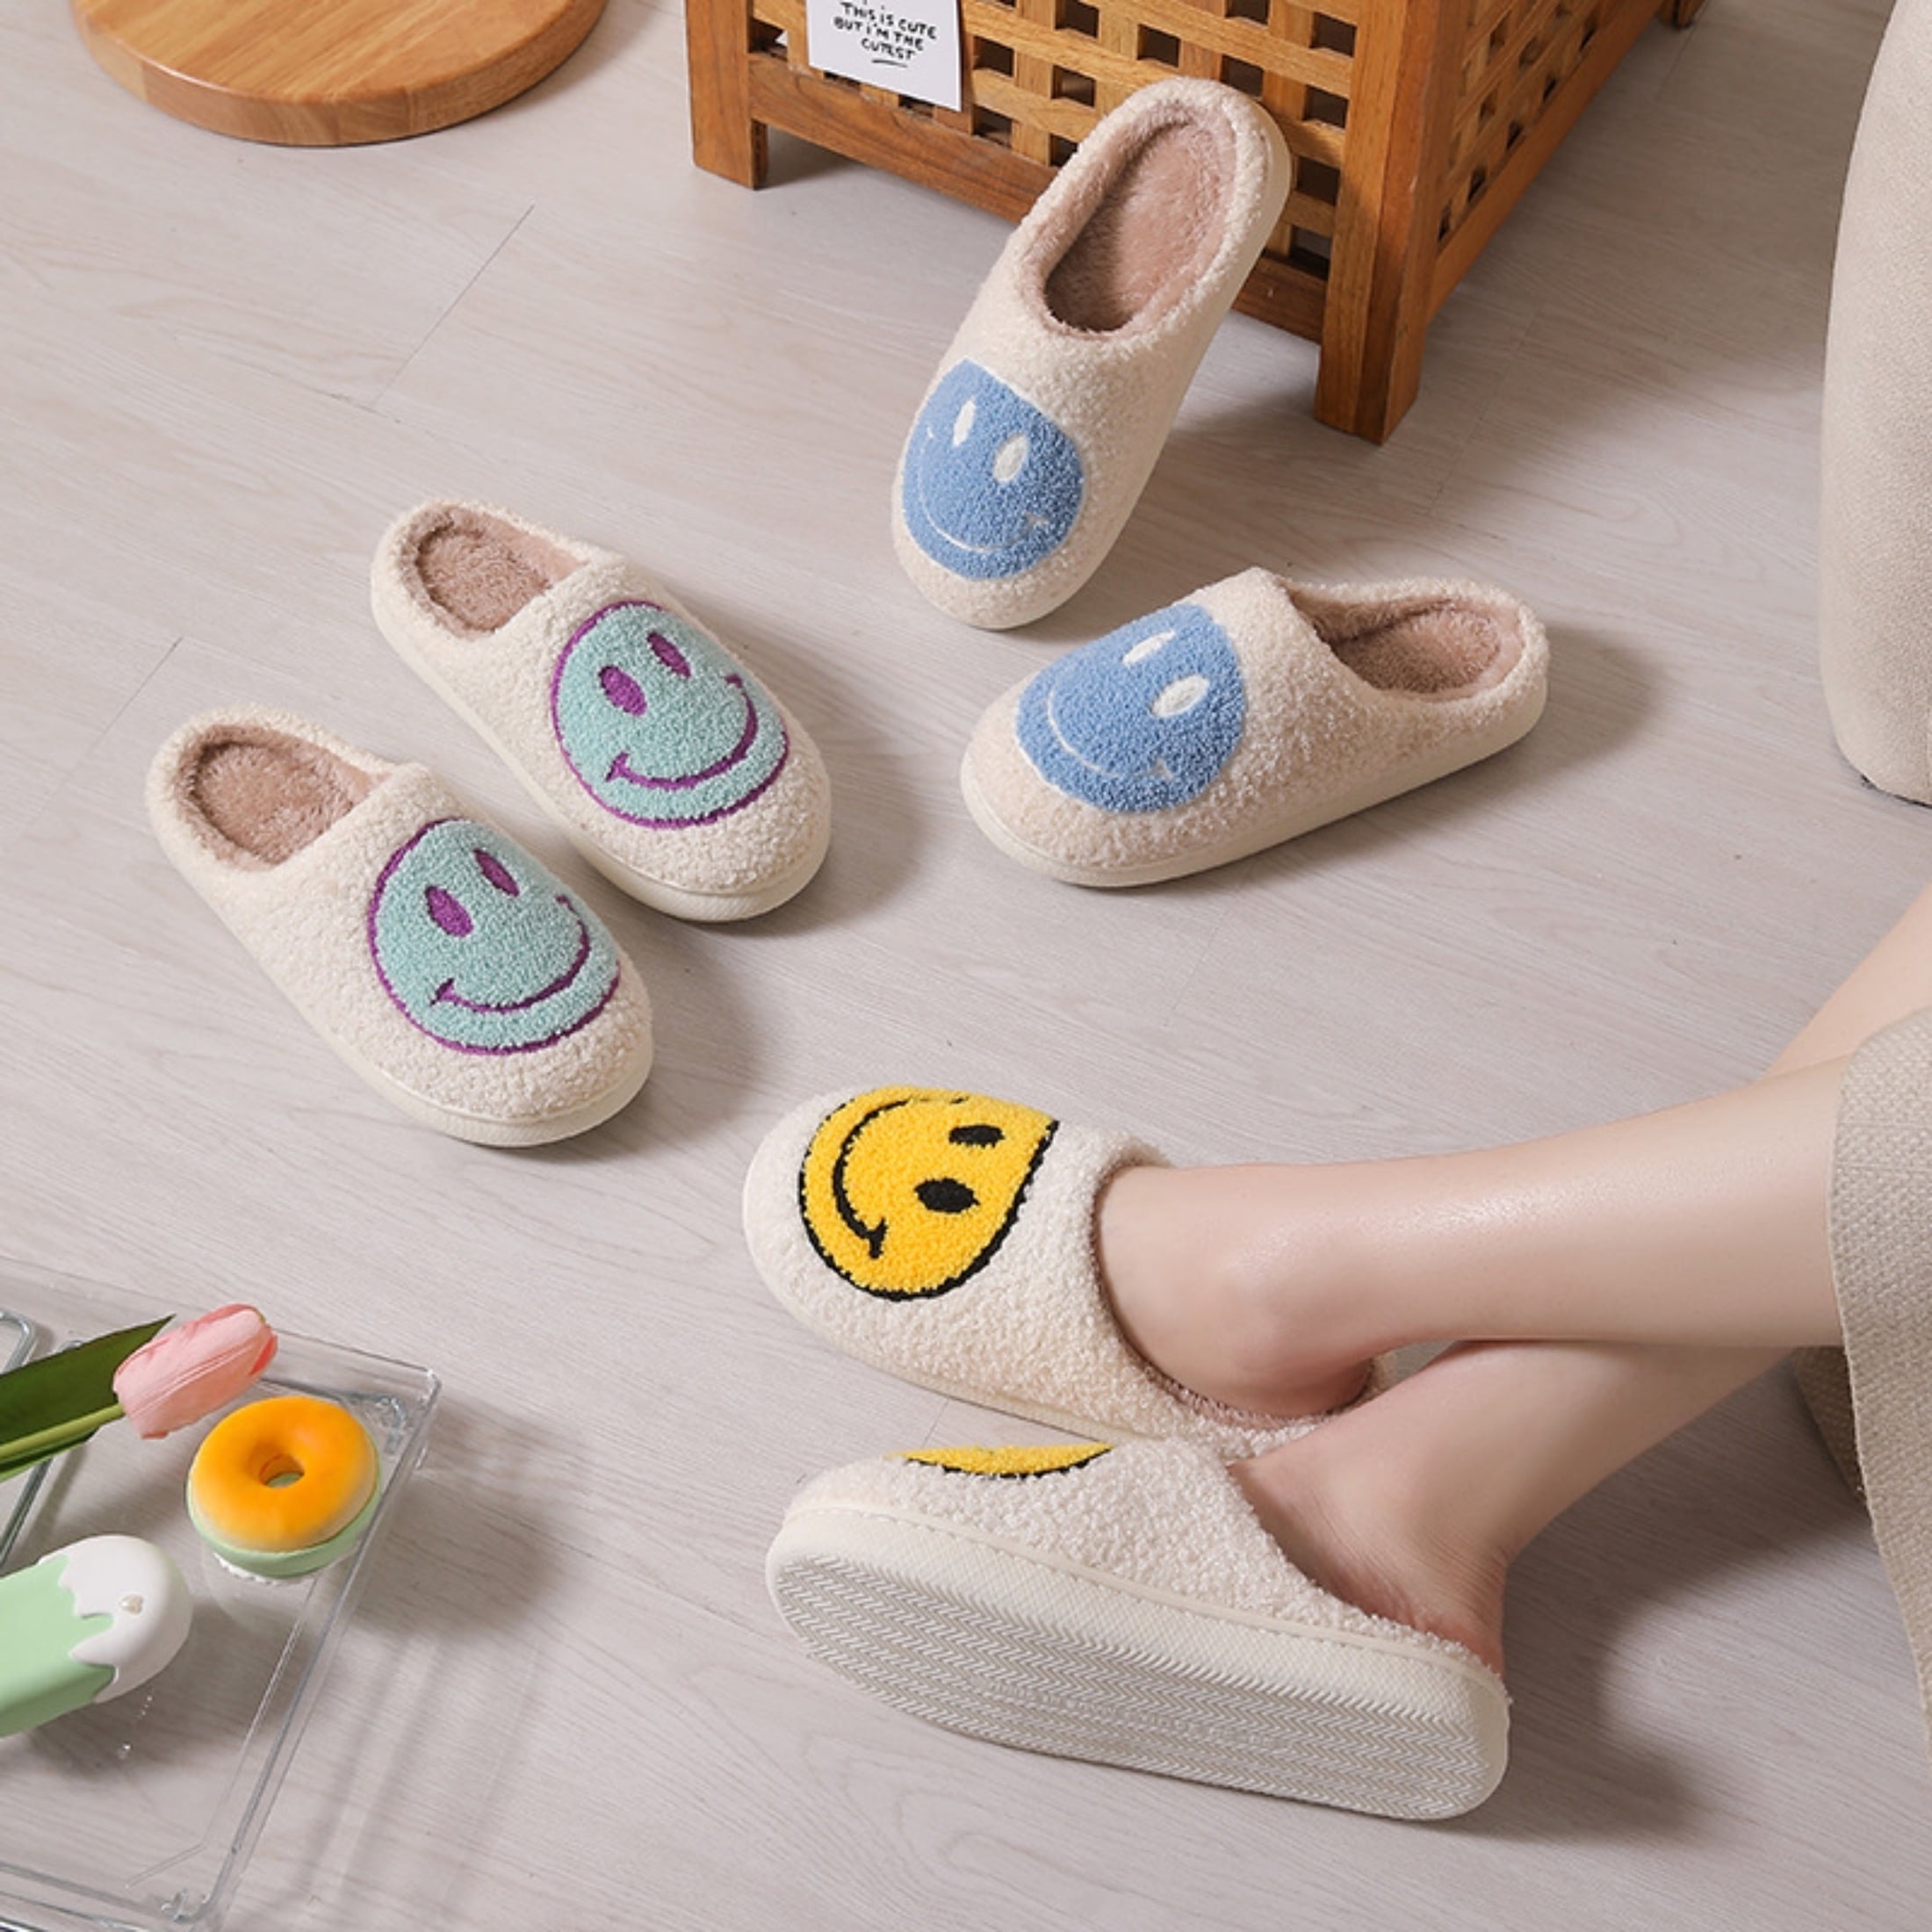 A person&#x27;s feet wearing one smiley face slipper, with other slippers nearby on a floor